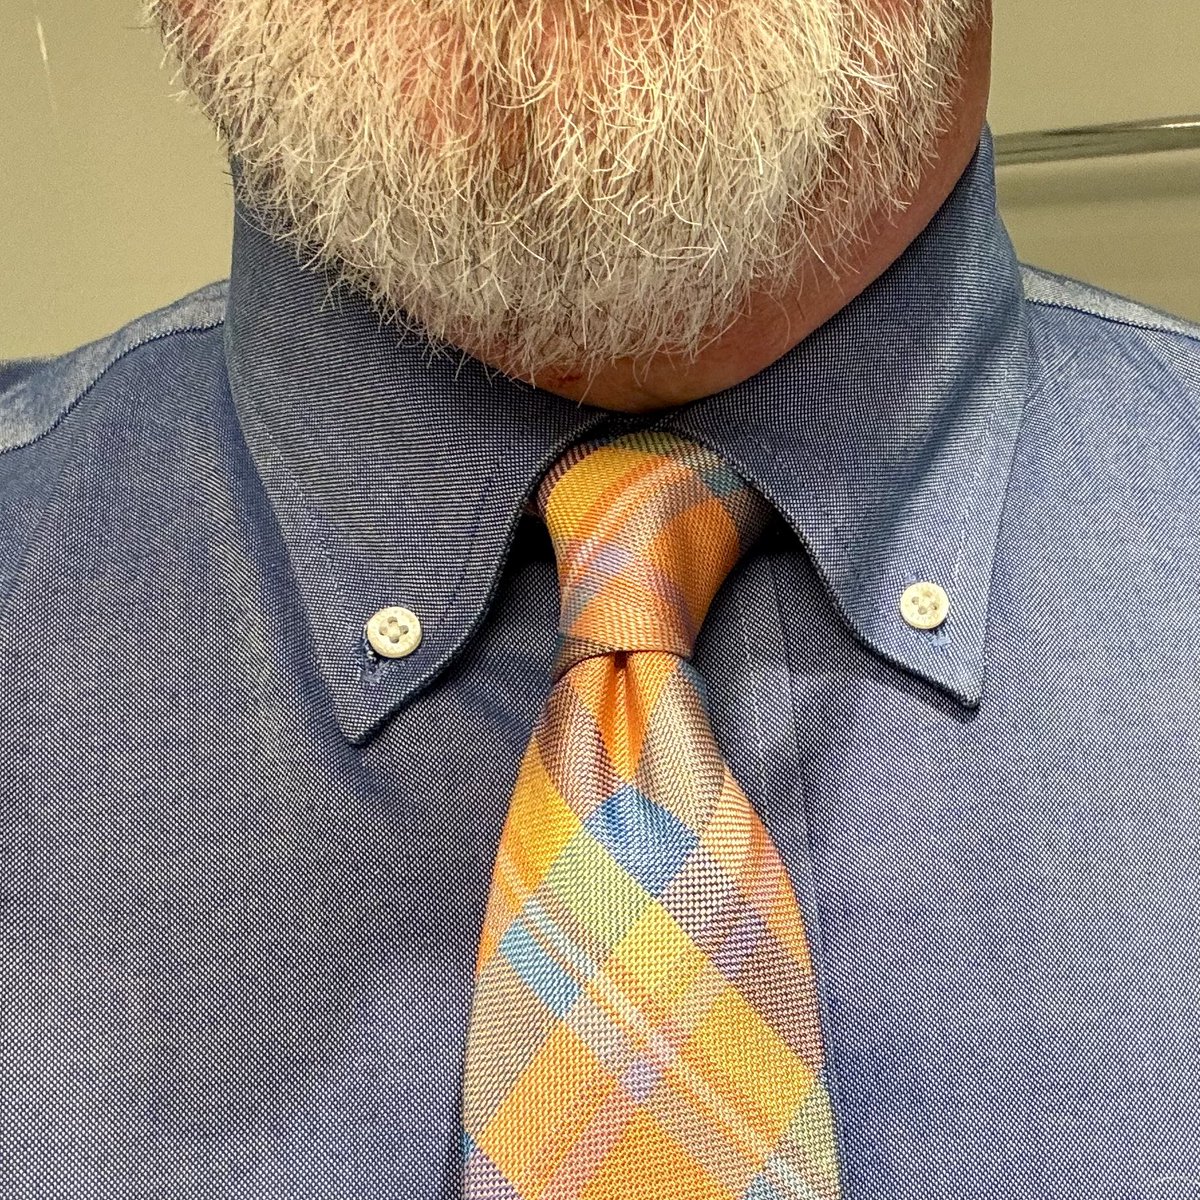 You know it’s gonna be a good day when you achieve a perfect tie dimple.